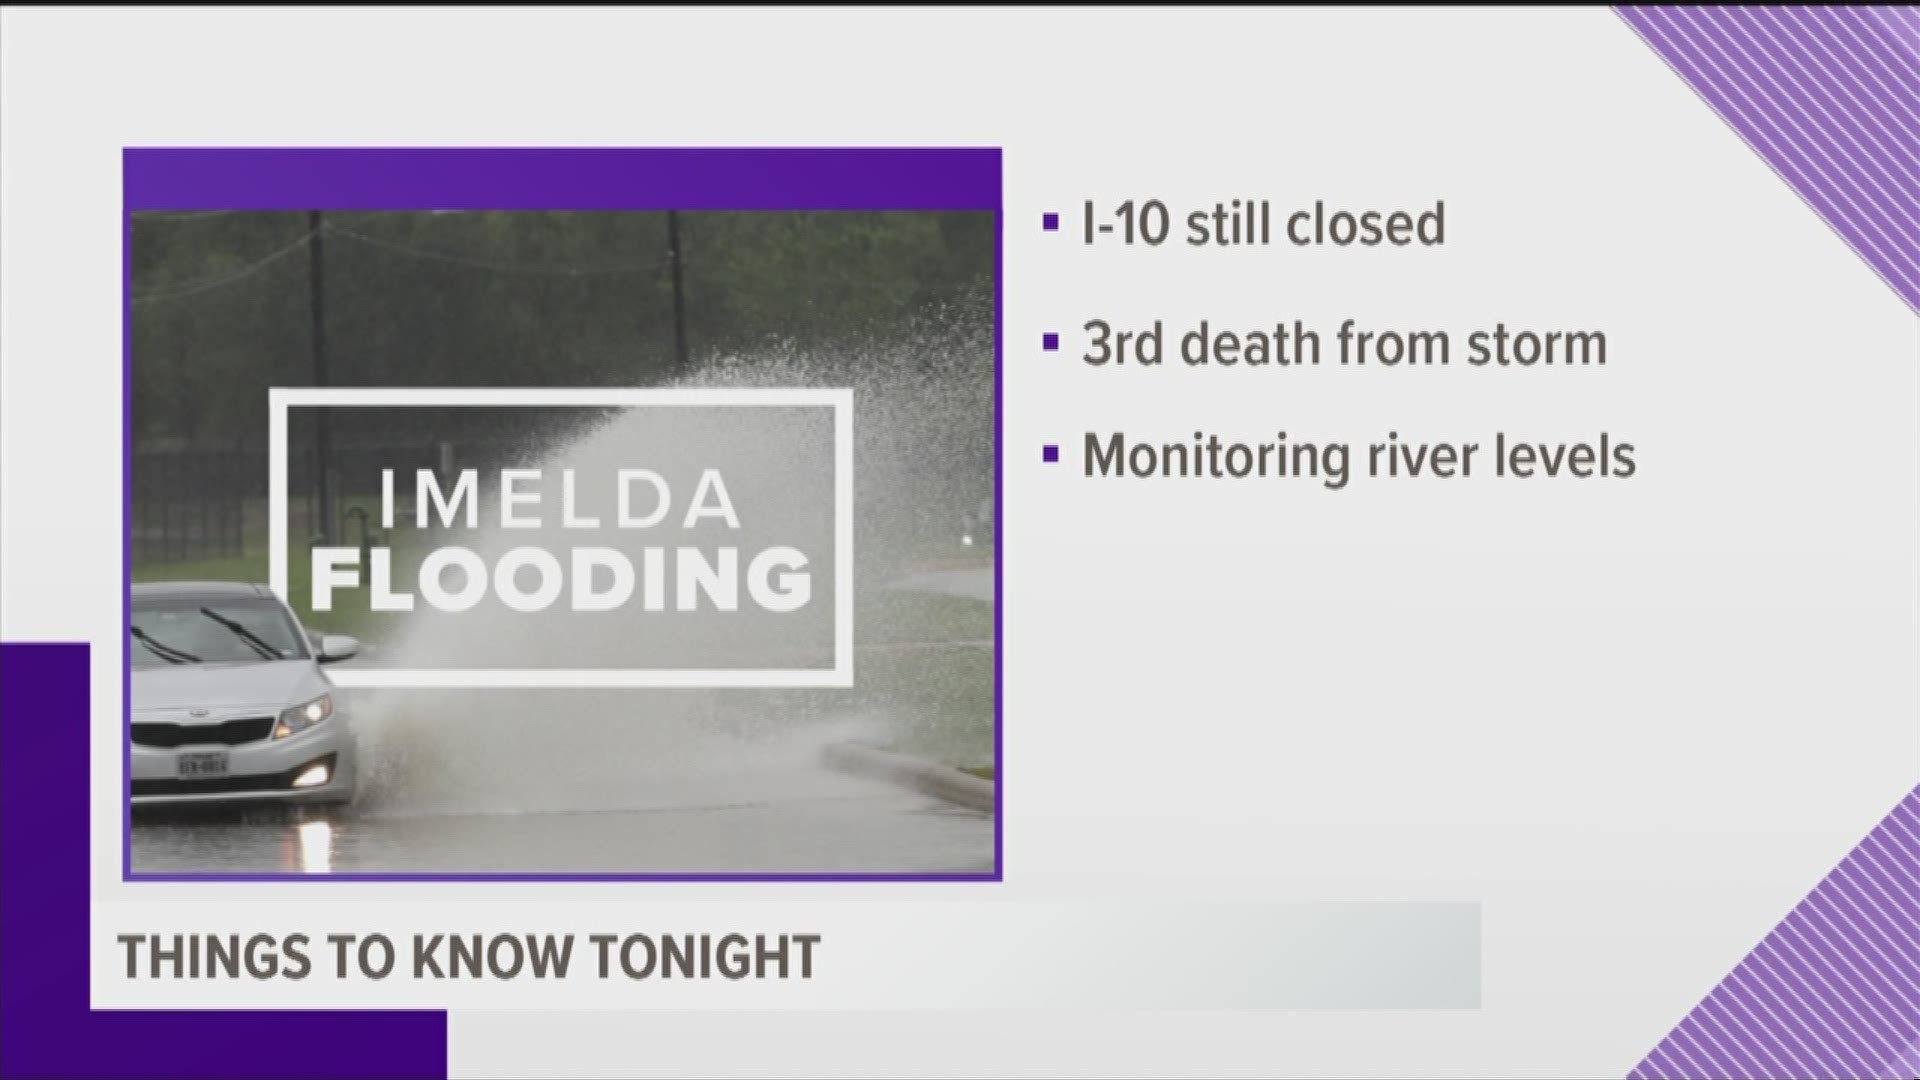 Three of the most important stories we're following regarding Imelda flooding across southeast Texas.